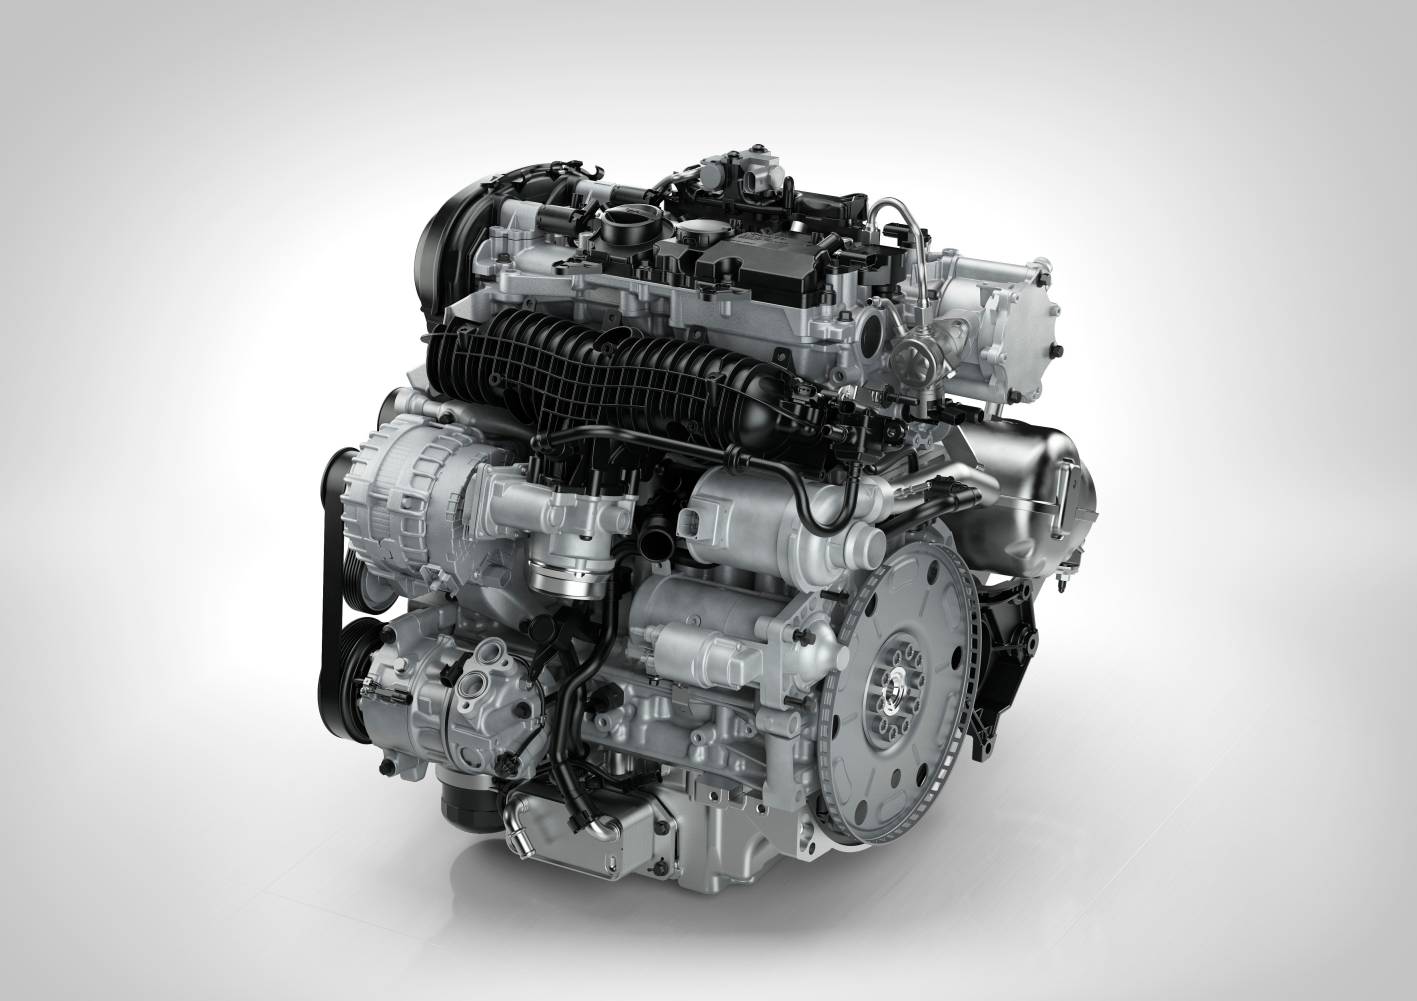 Volvo introduces new 'DriveE' T5, D4 engines & eight